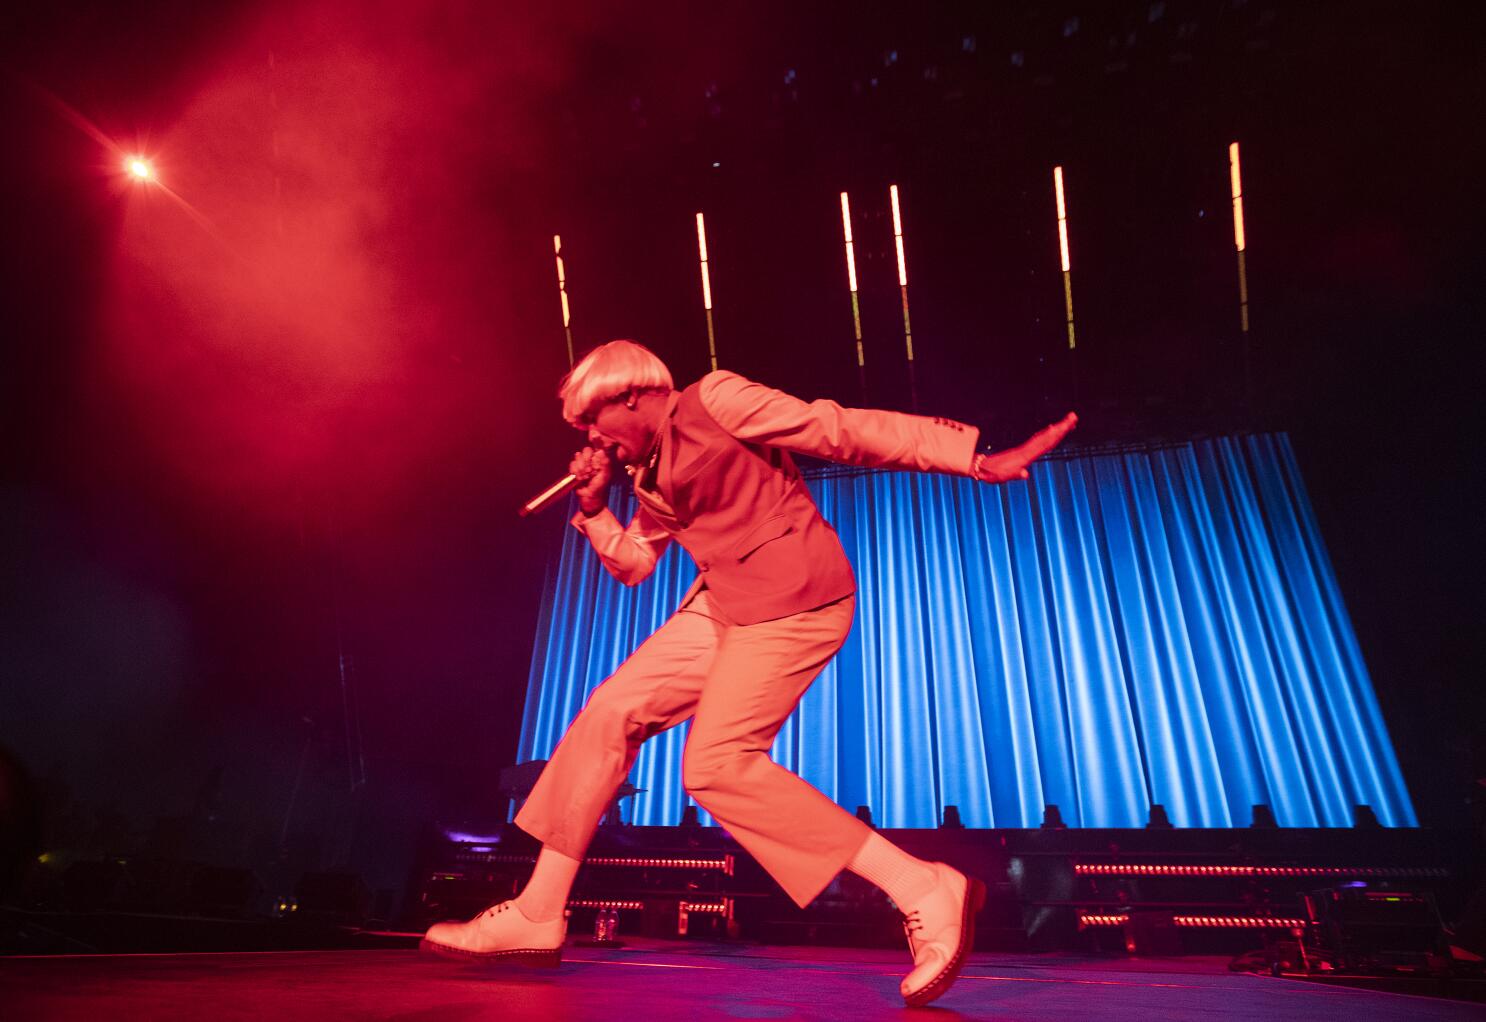 Camp Flog Gnaw 2023 lineup: Tyler the Creator, Turnstile, more